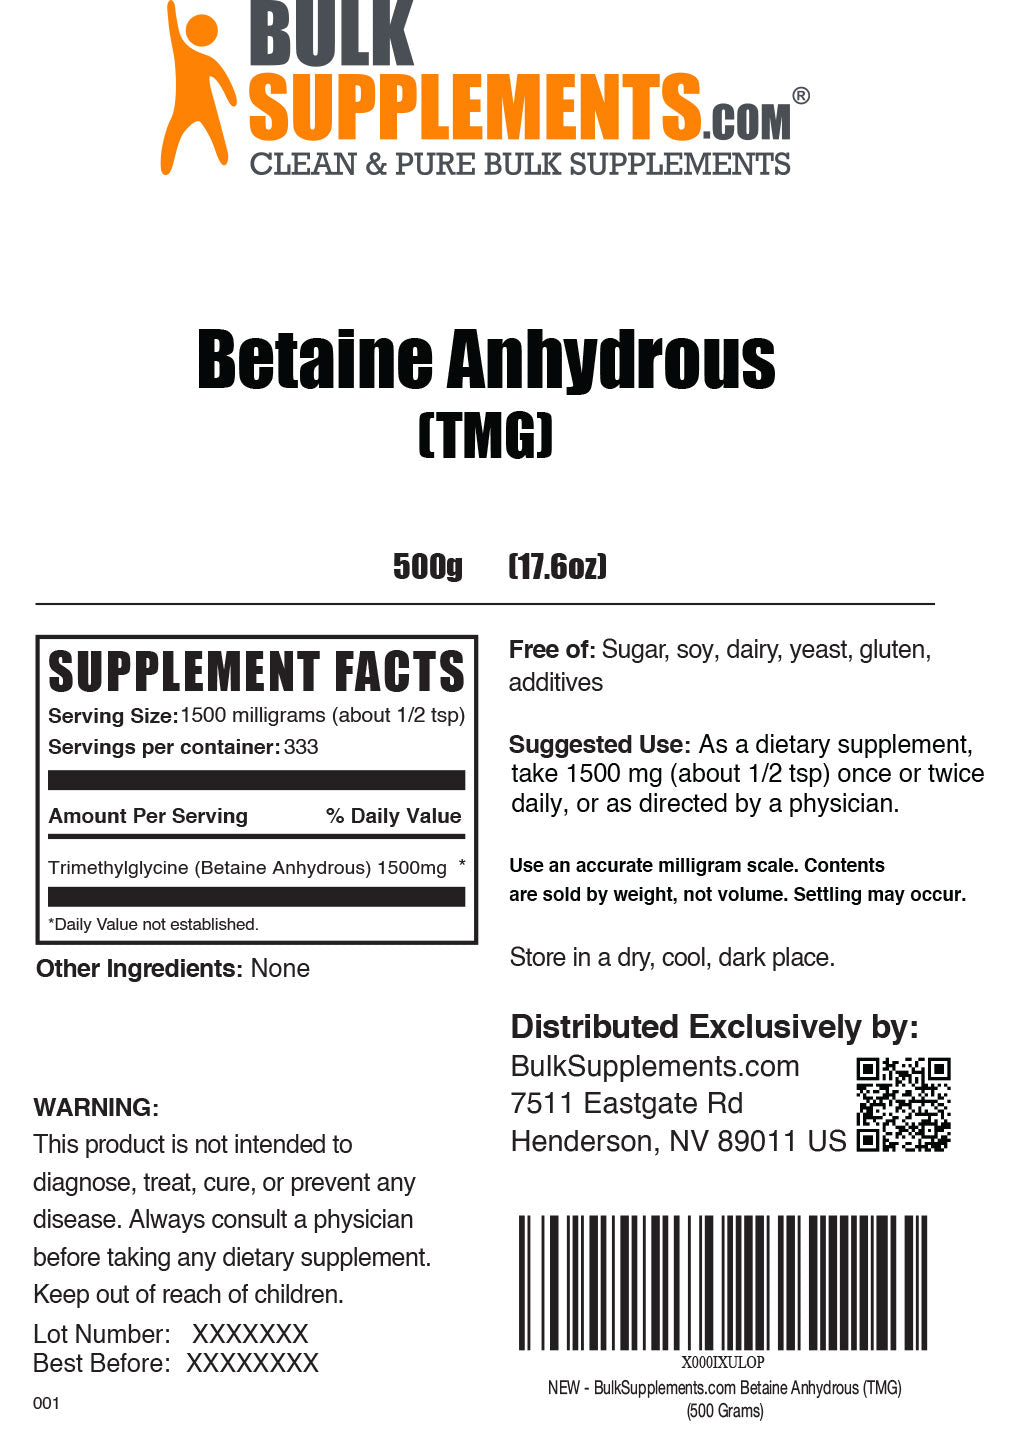 Betaine Anhydrous (TMG) powder label 500g